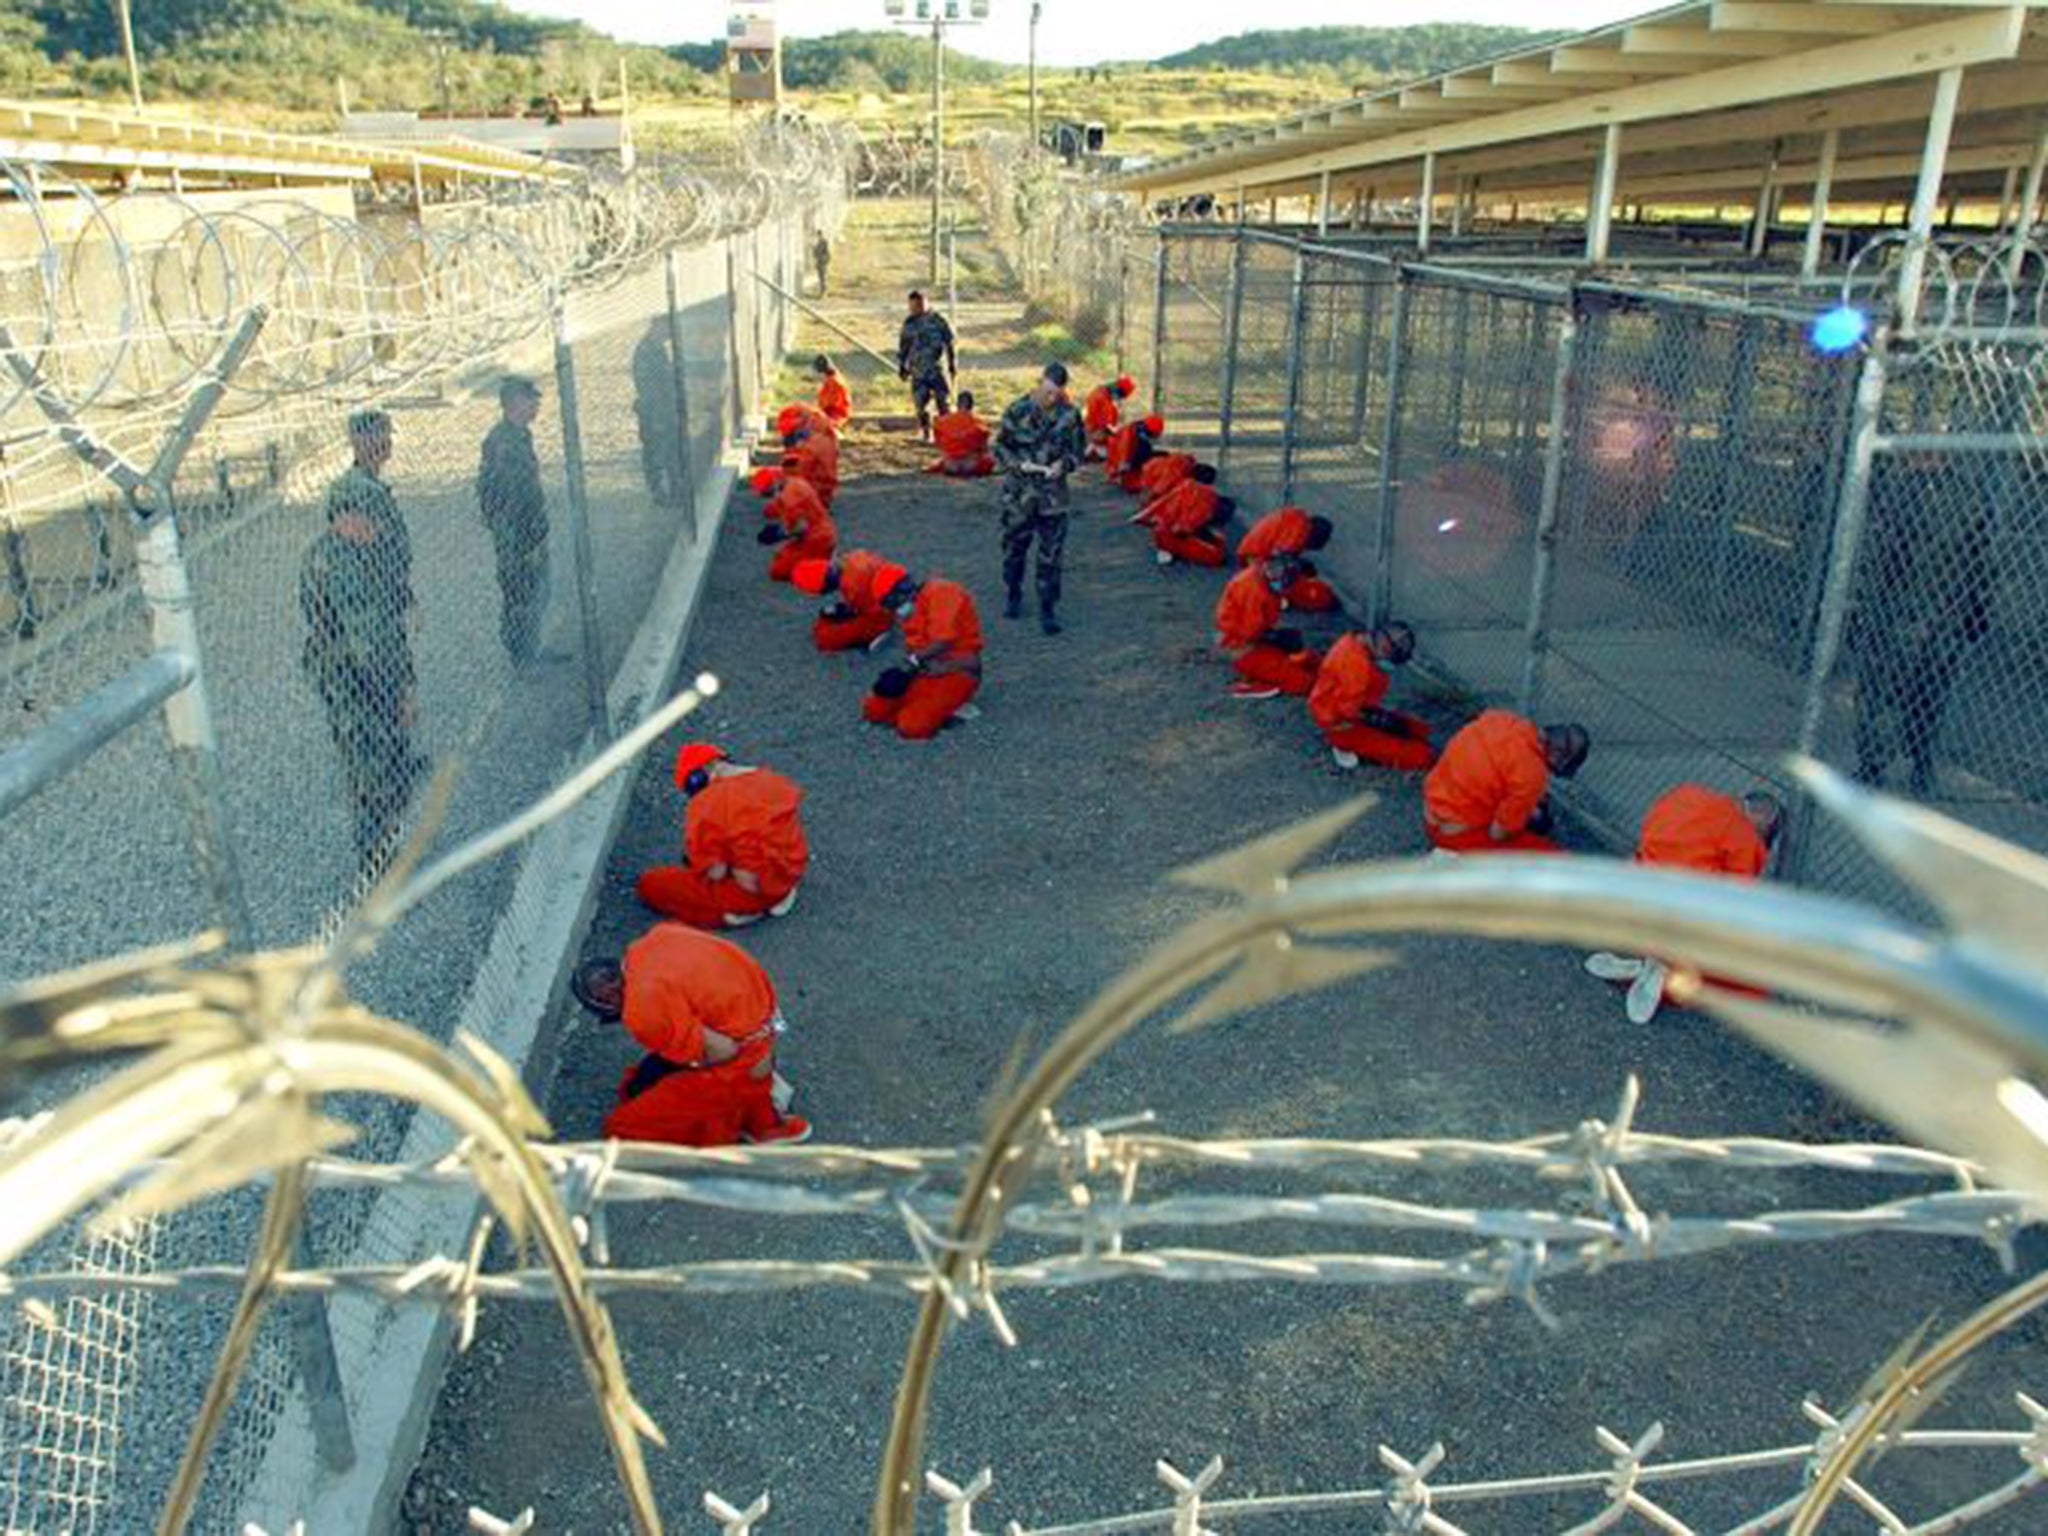 In the aftermath of 9/11, US policy in Guantanamo was acceptable to terrified Americans